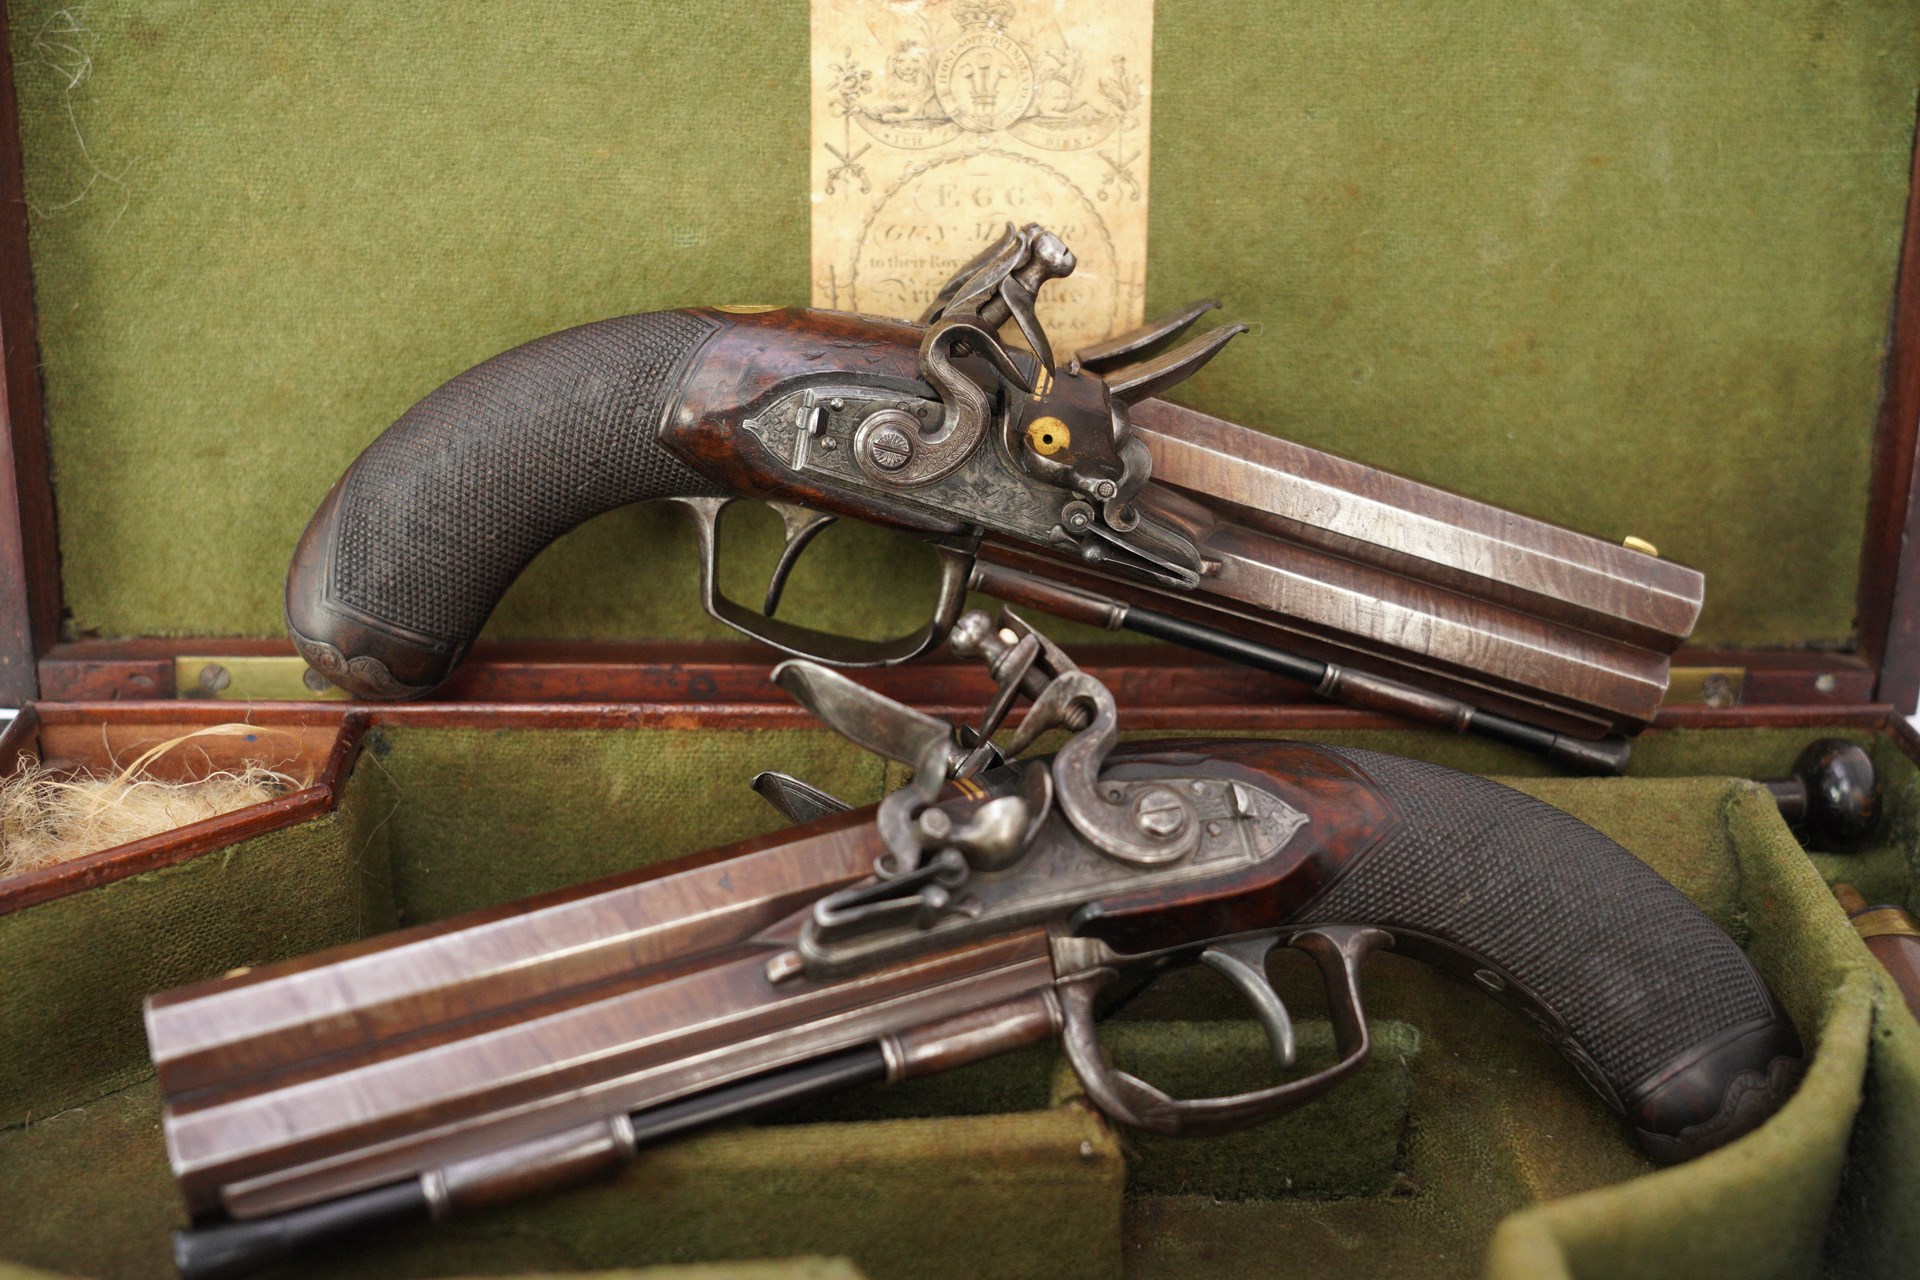 This cased pair of Durs Egg presentation over/under .48 caliber flintlock pistols dates from 1820-30.